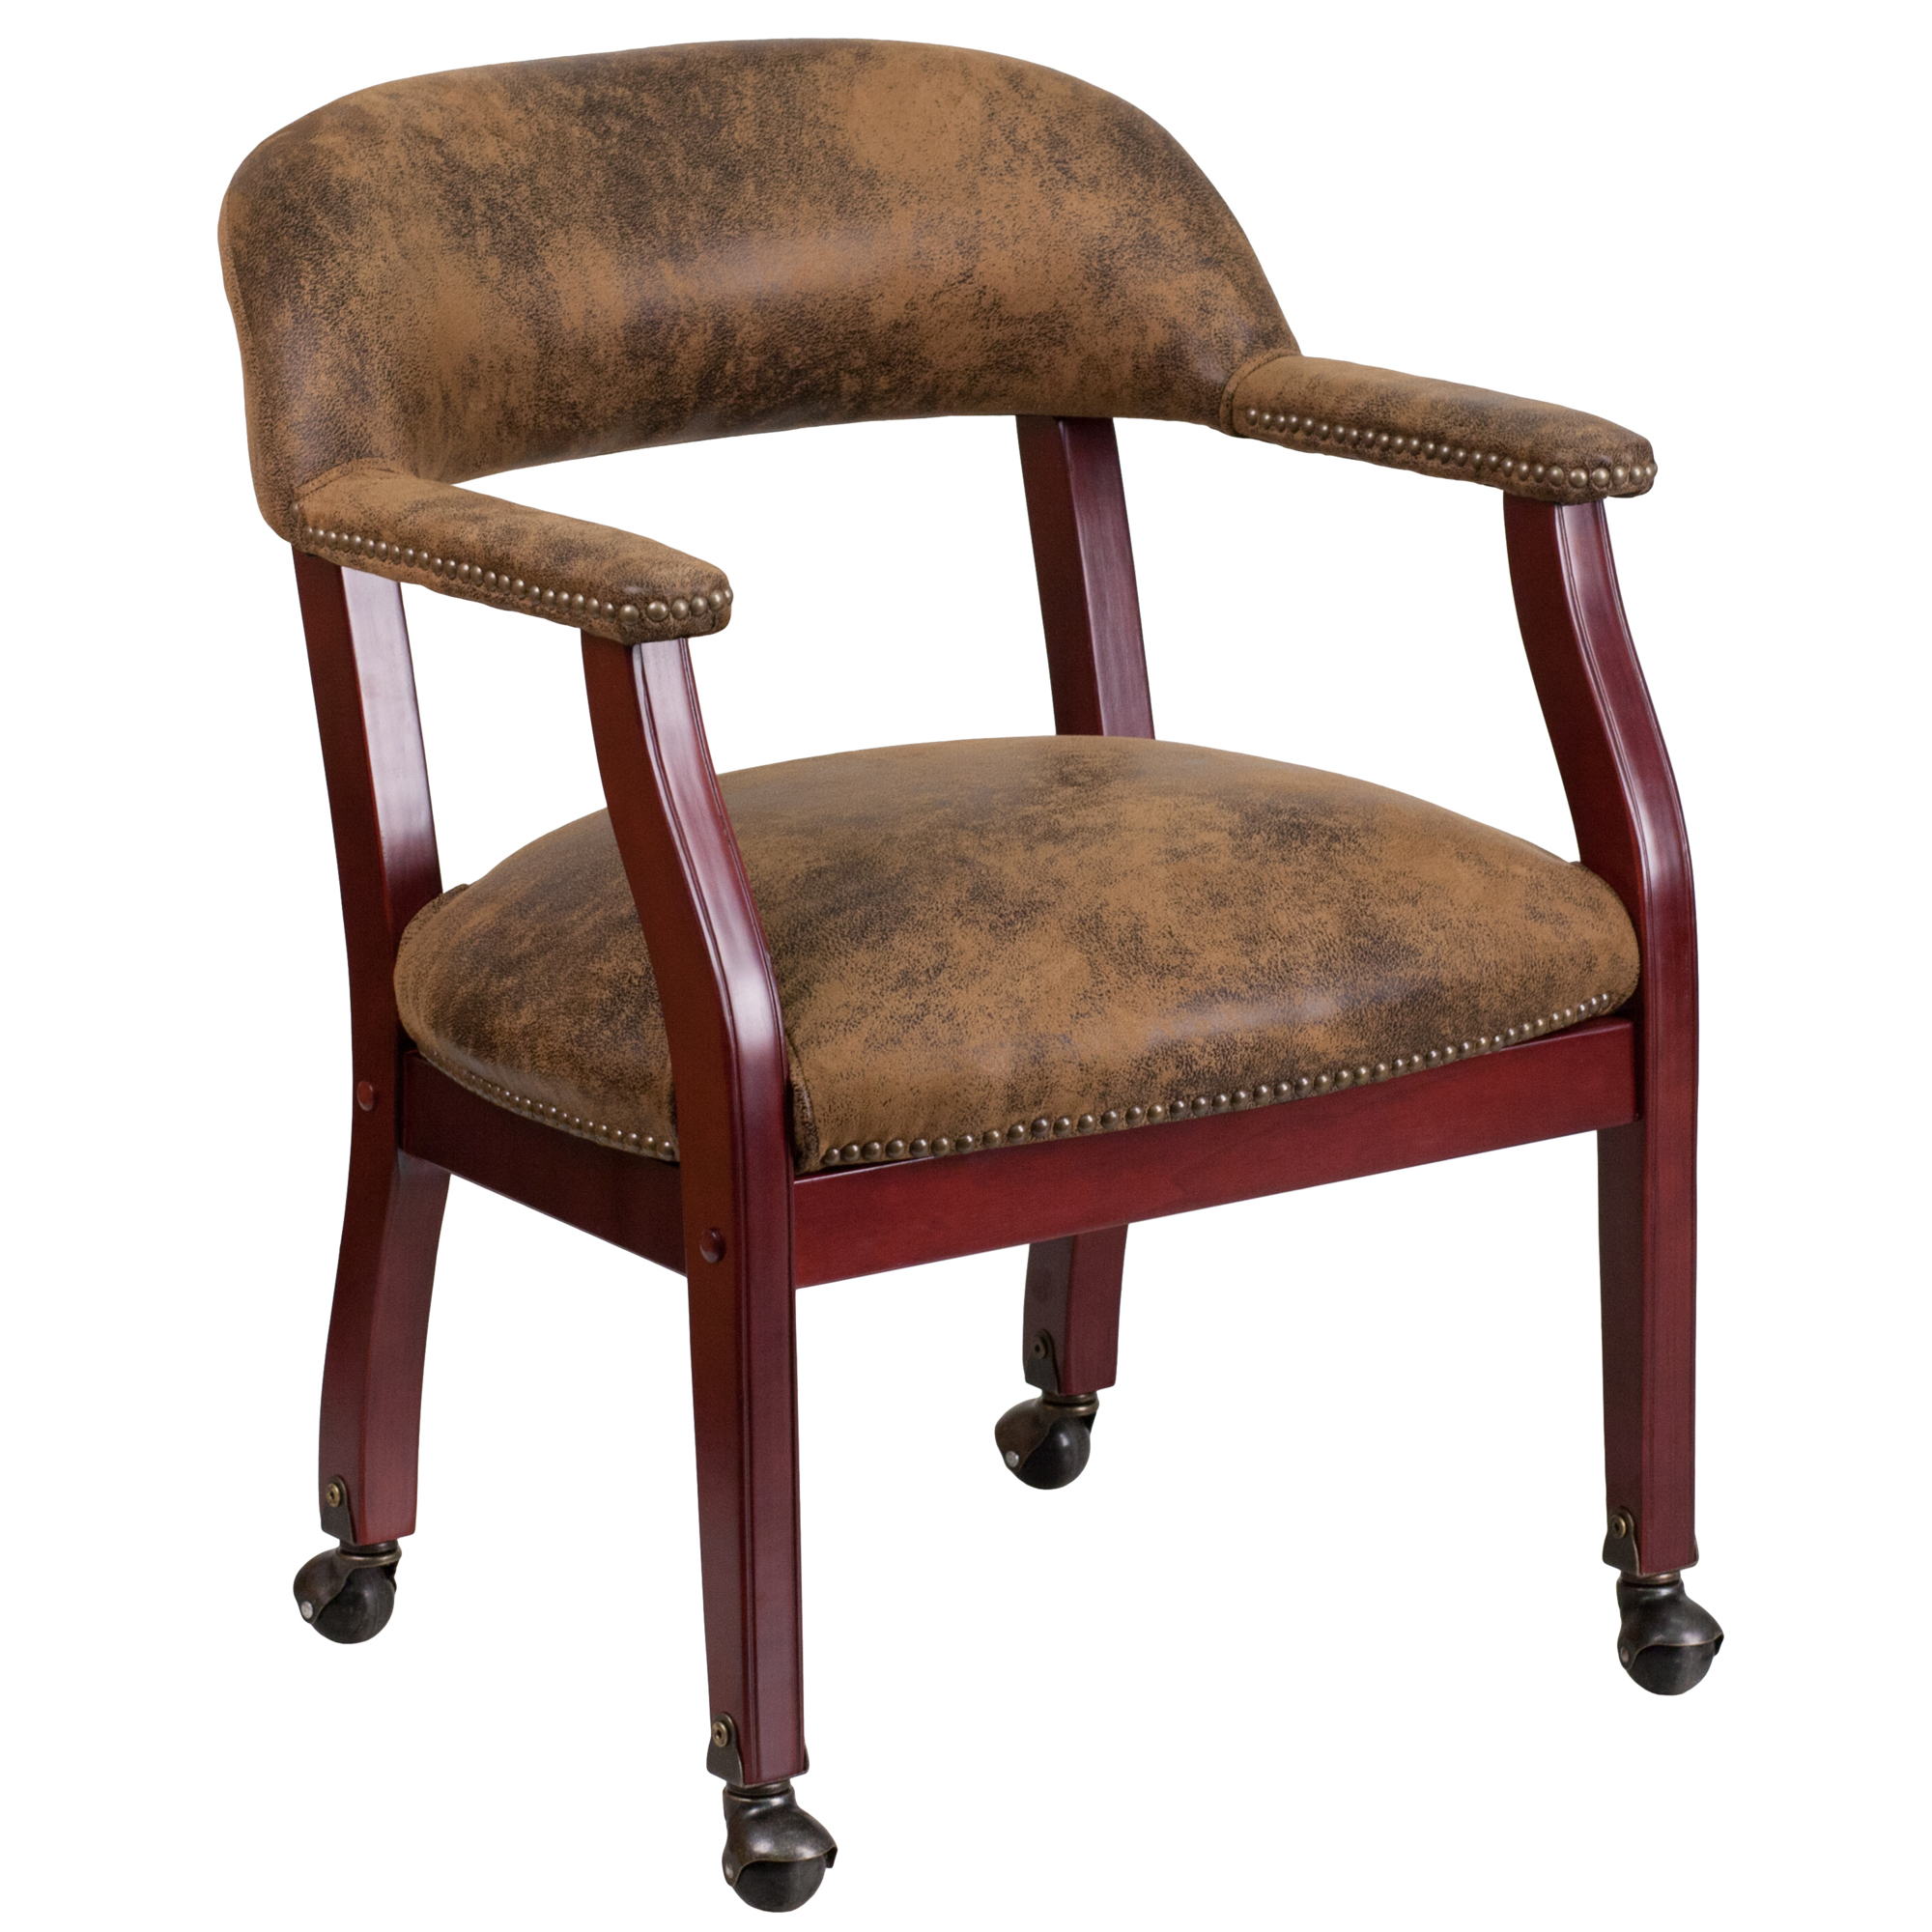 Flash Furniture, Bomber Jacket Brown MIC Chair - Accent Nail Trim, Primary Color Brown, Included (qty.) 1, Model BZ100BRN